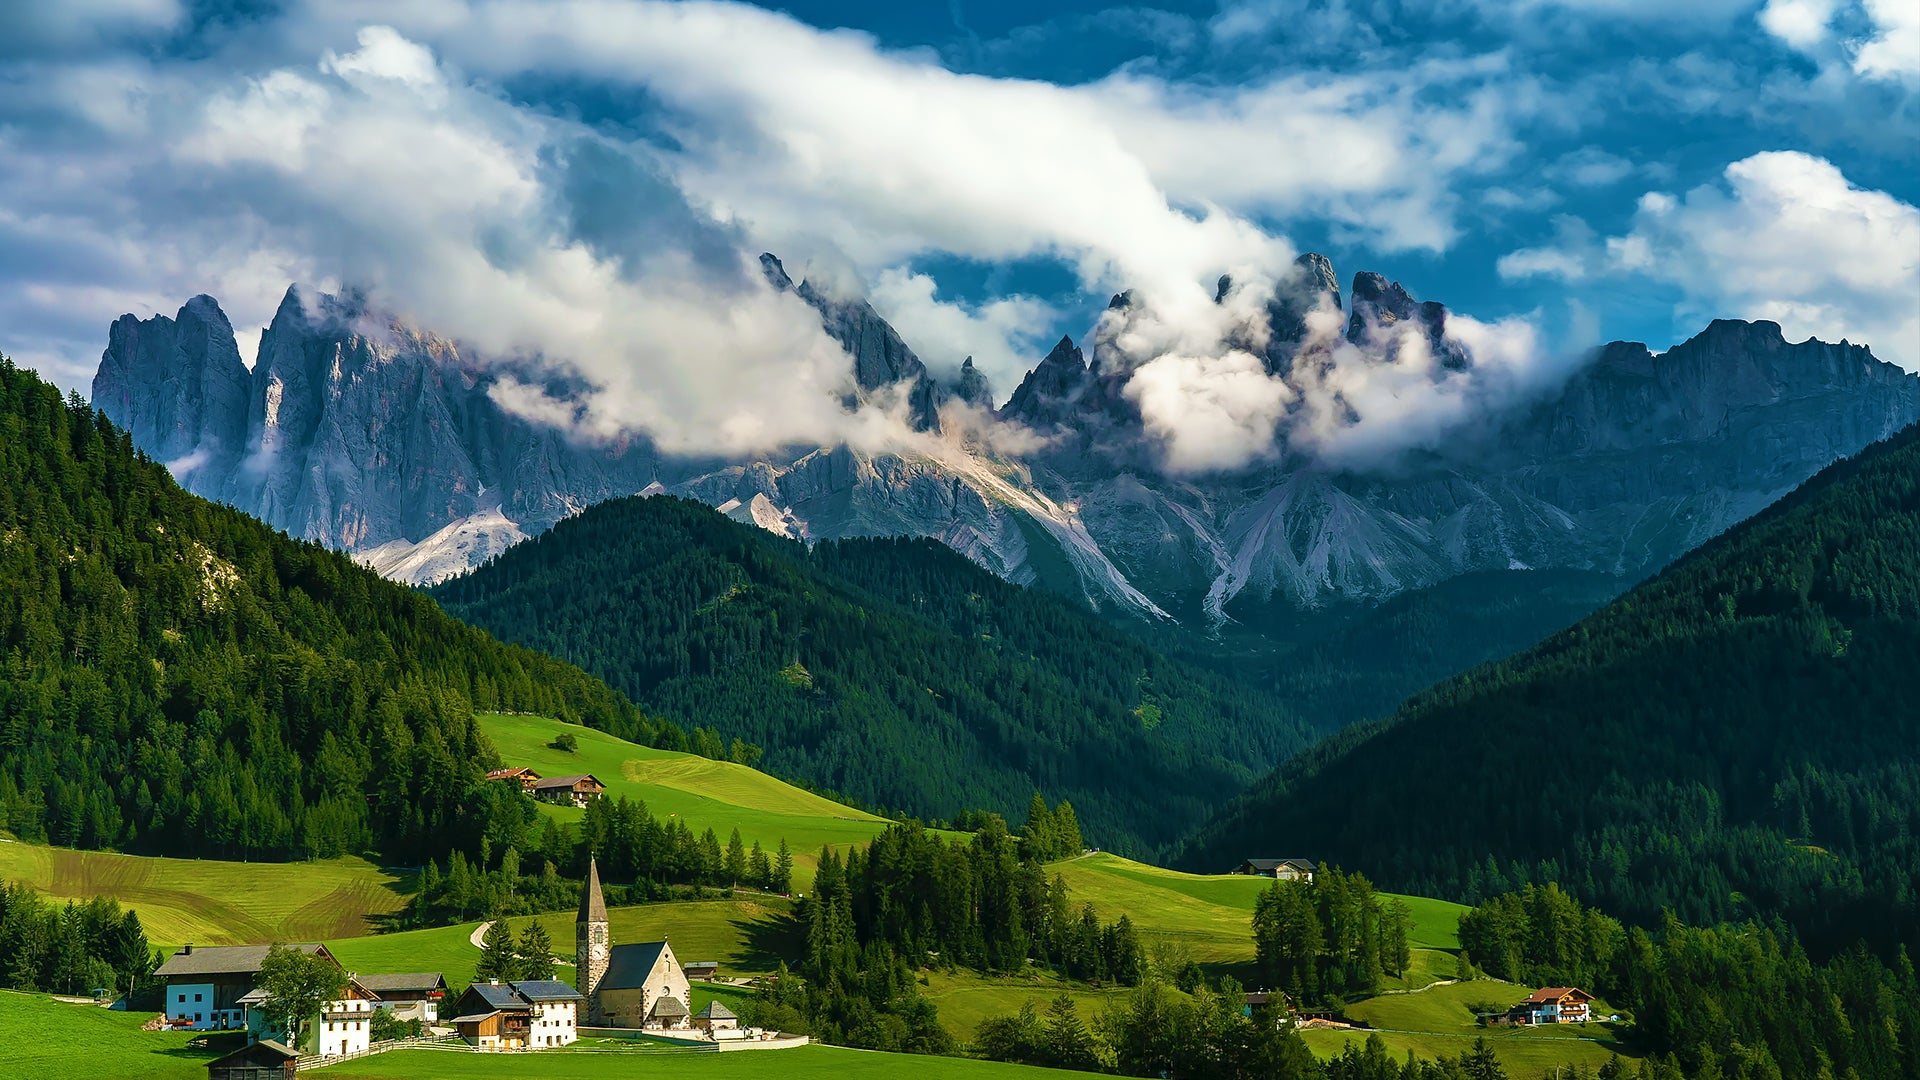 Alps & Dolomites" 5 Min Short Nature Film in 4K – Nature Relaxation™ Films by David Huting